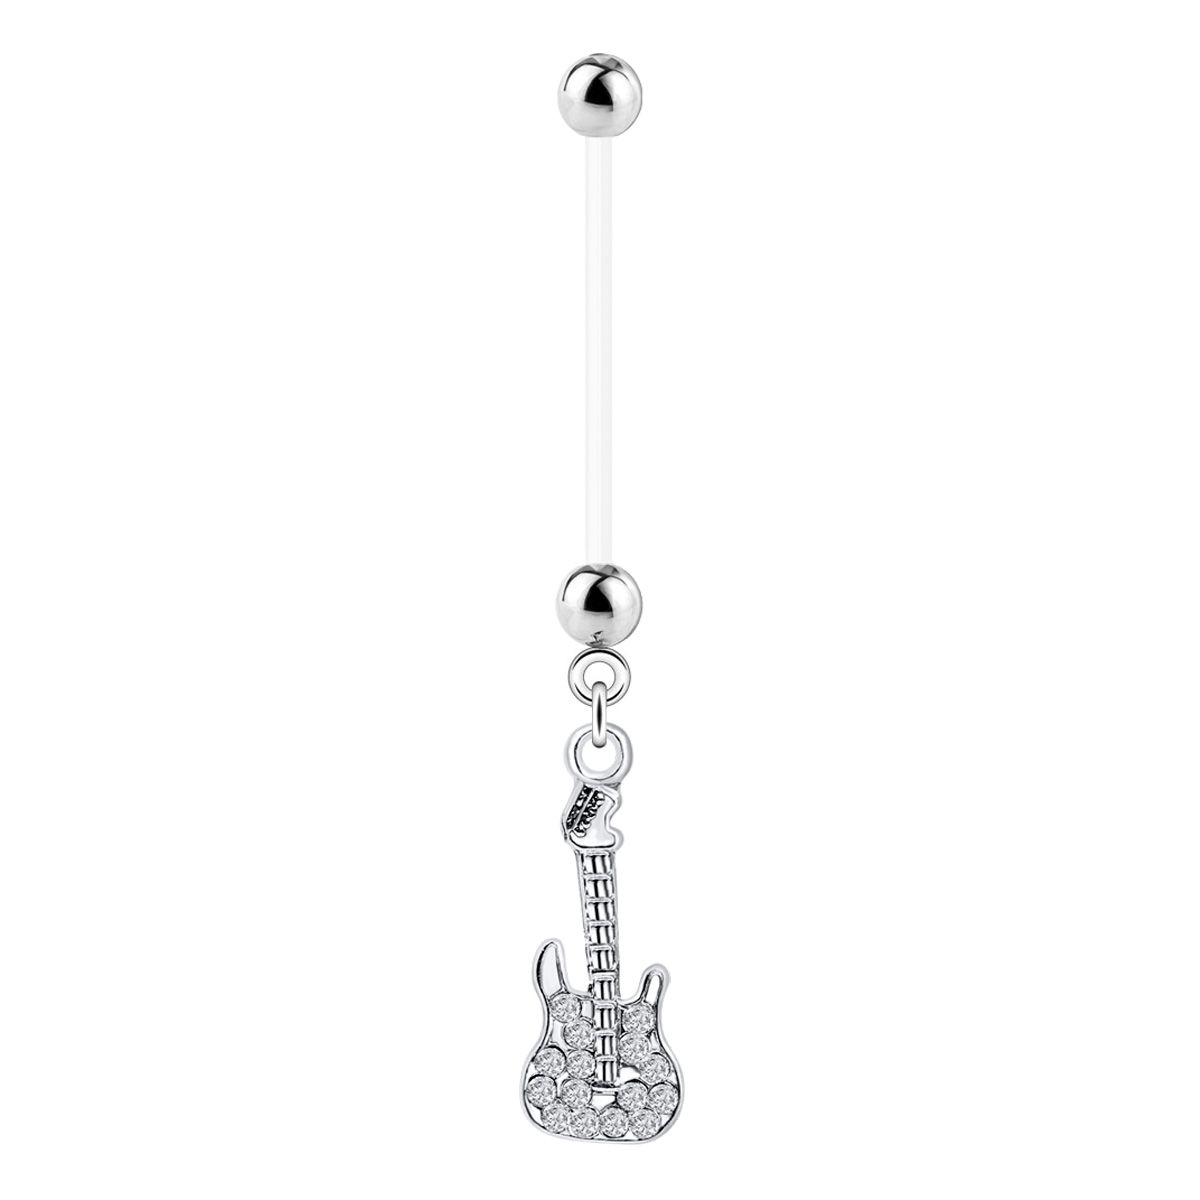 Pregnancy belly ring with studded guitar dangle